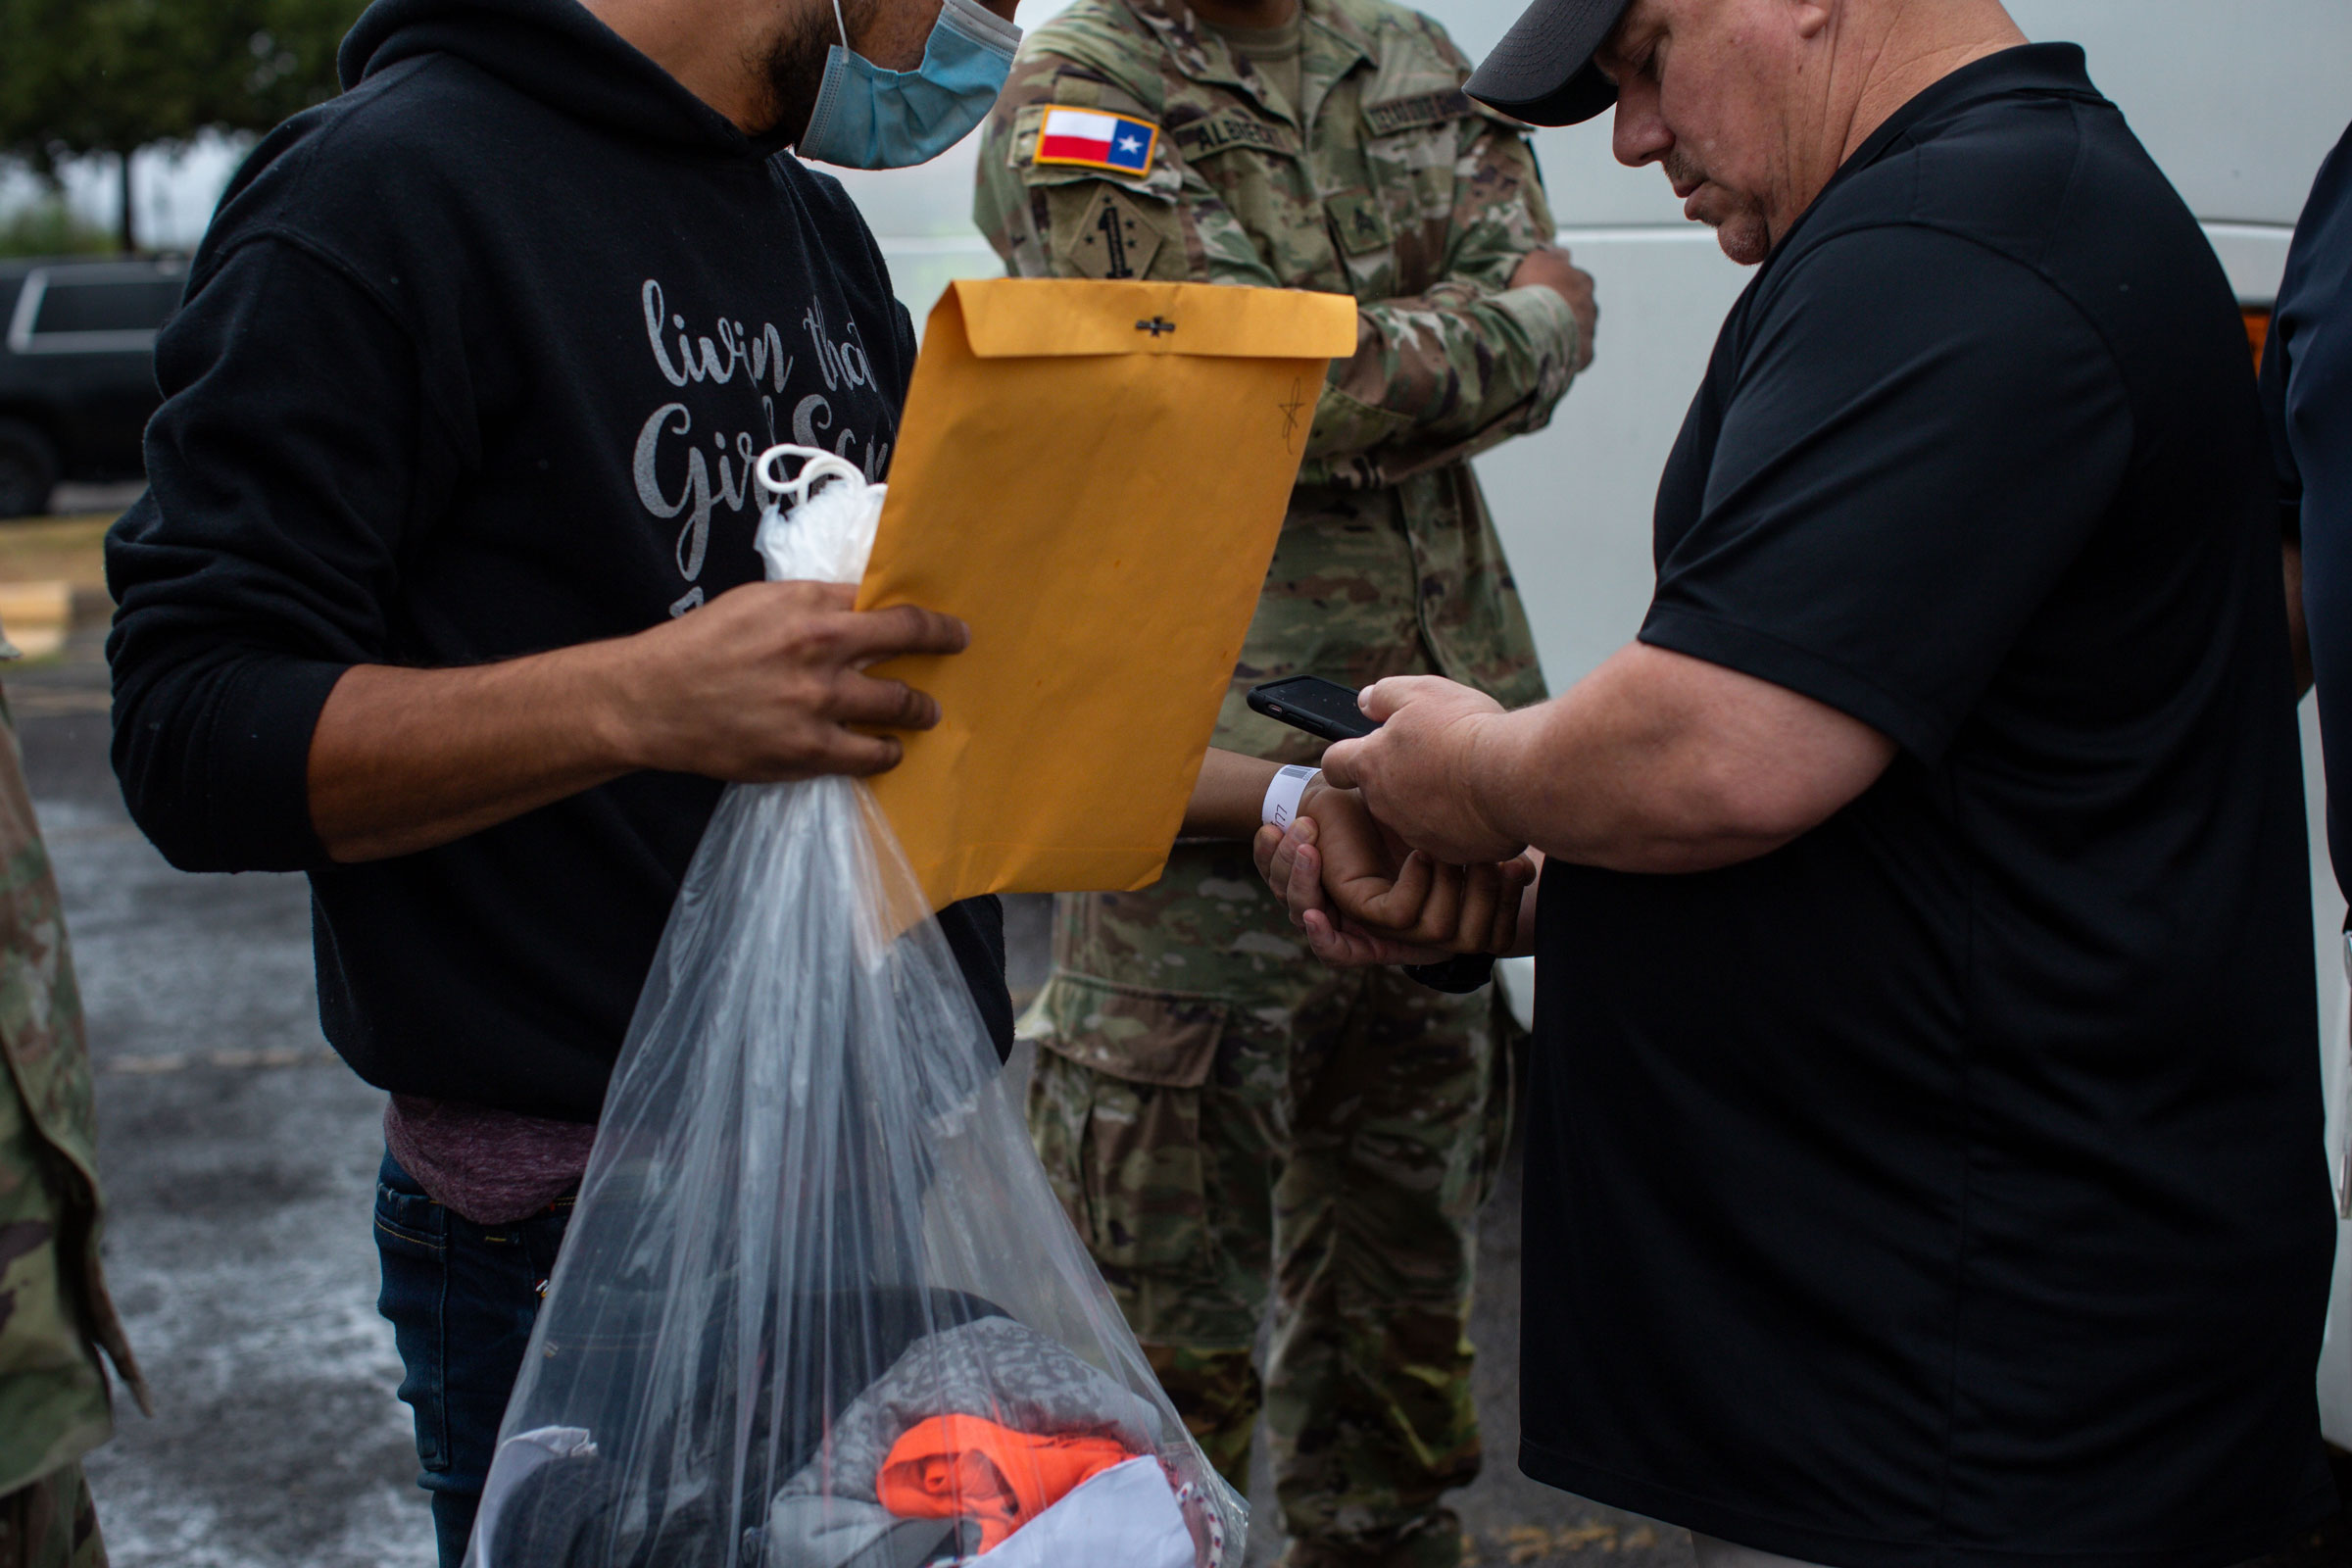 An official scans a migrant’s assigned barcoded wristband required to travel on an Operation Lone Star bus to either Washington, D.C. or New York, New York, from the Val Verde Border Humanitarian Coalition in Del Rio, Texas, on Aug. 15, 2022. (Kaylee Greenlee Beal for TIME)